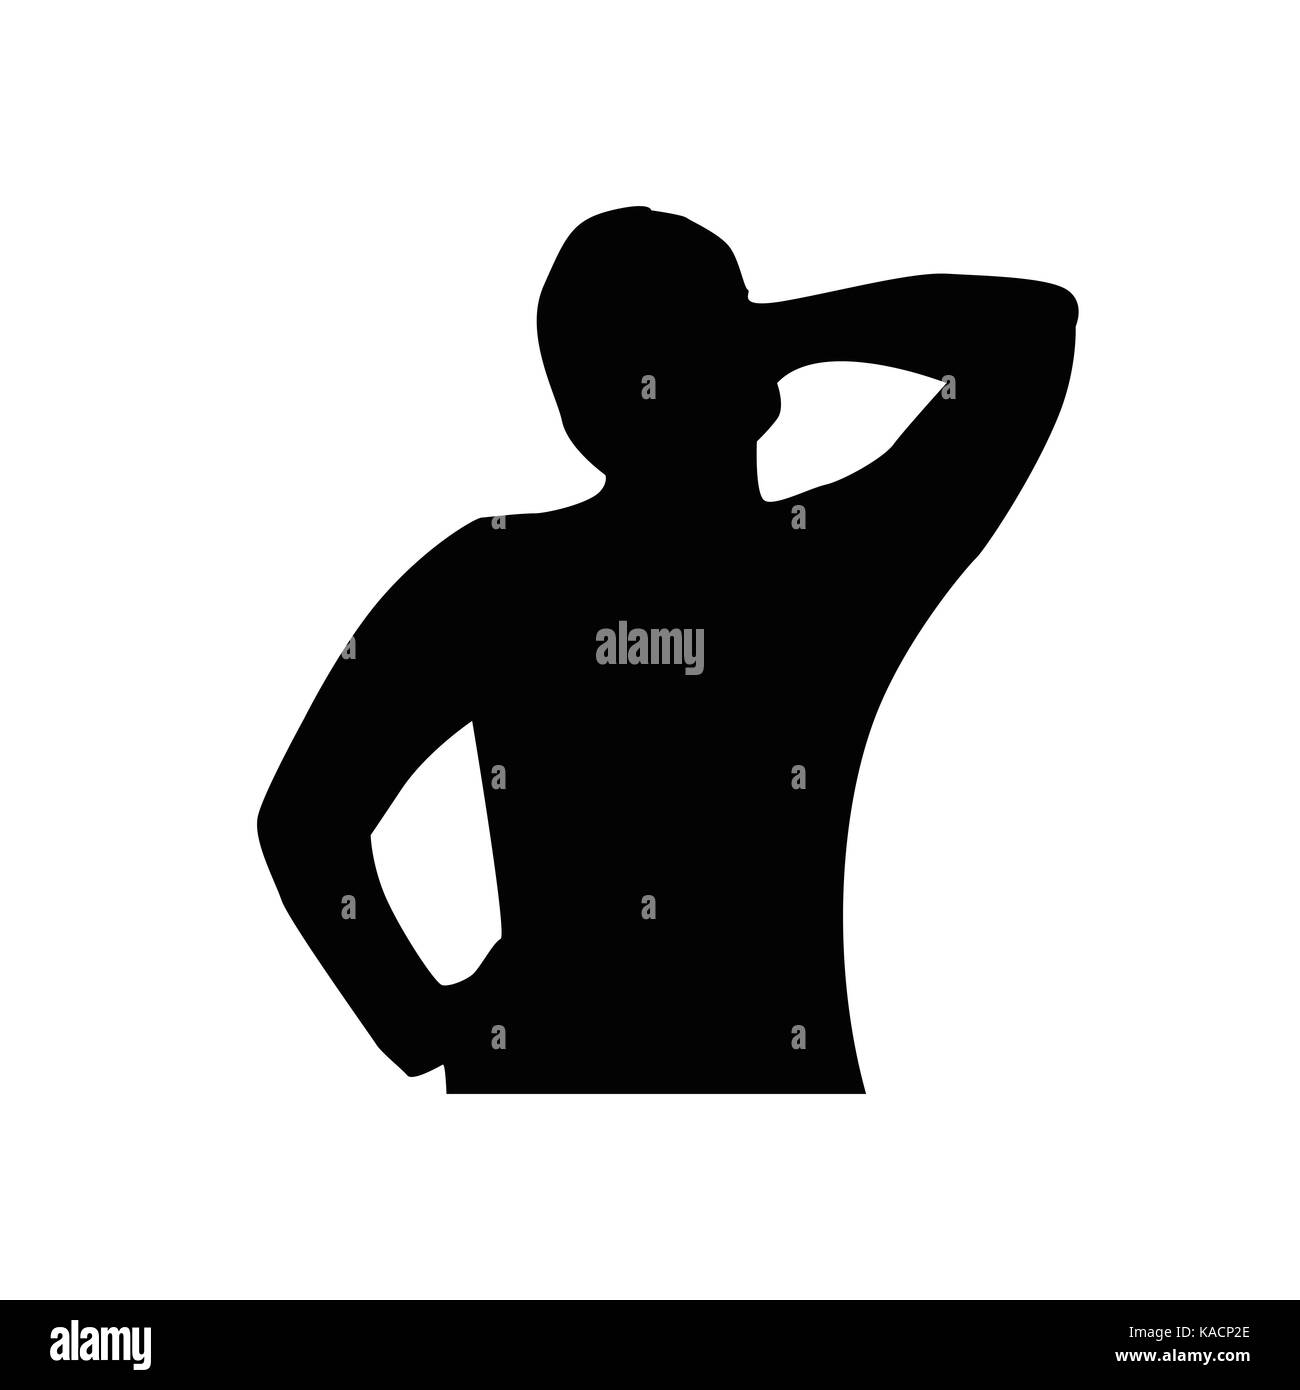 man thinking silhouette, illustration design, isolated on white background. Stock Vector